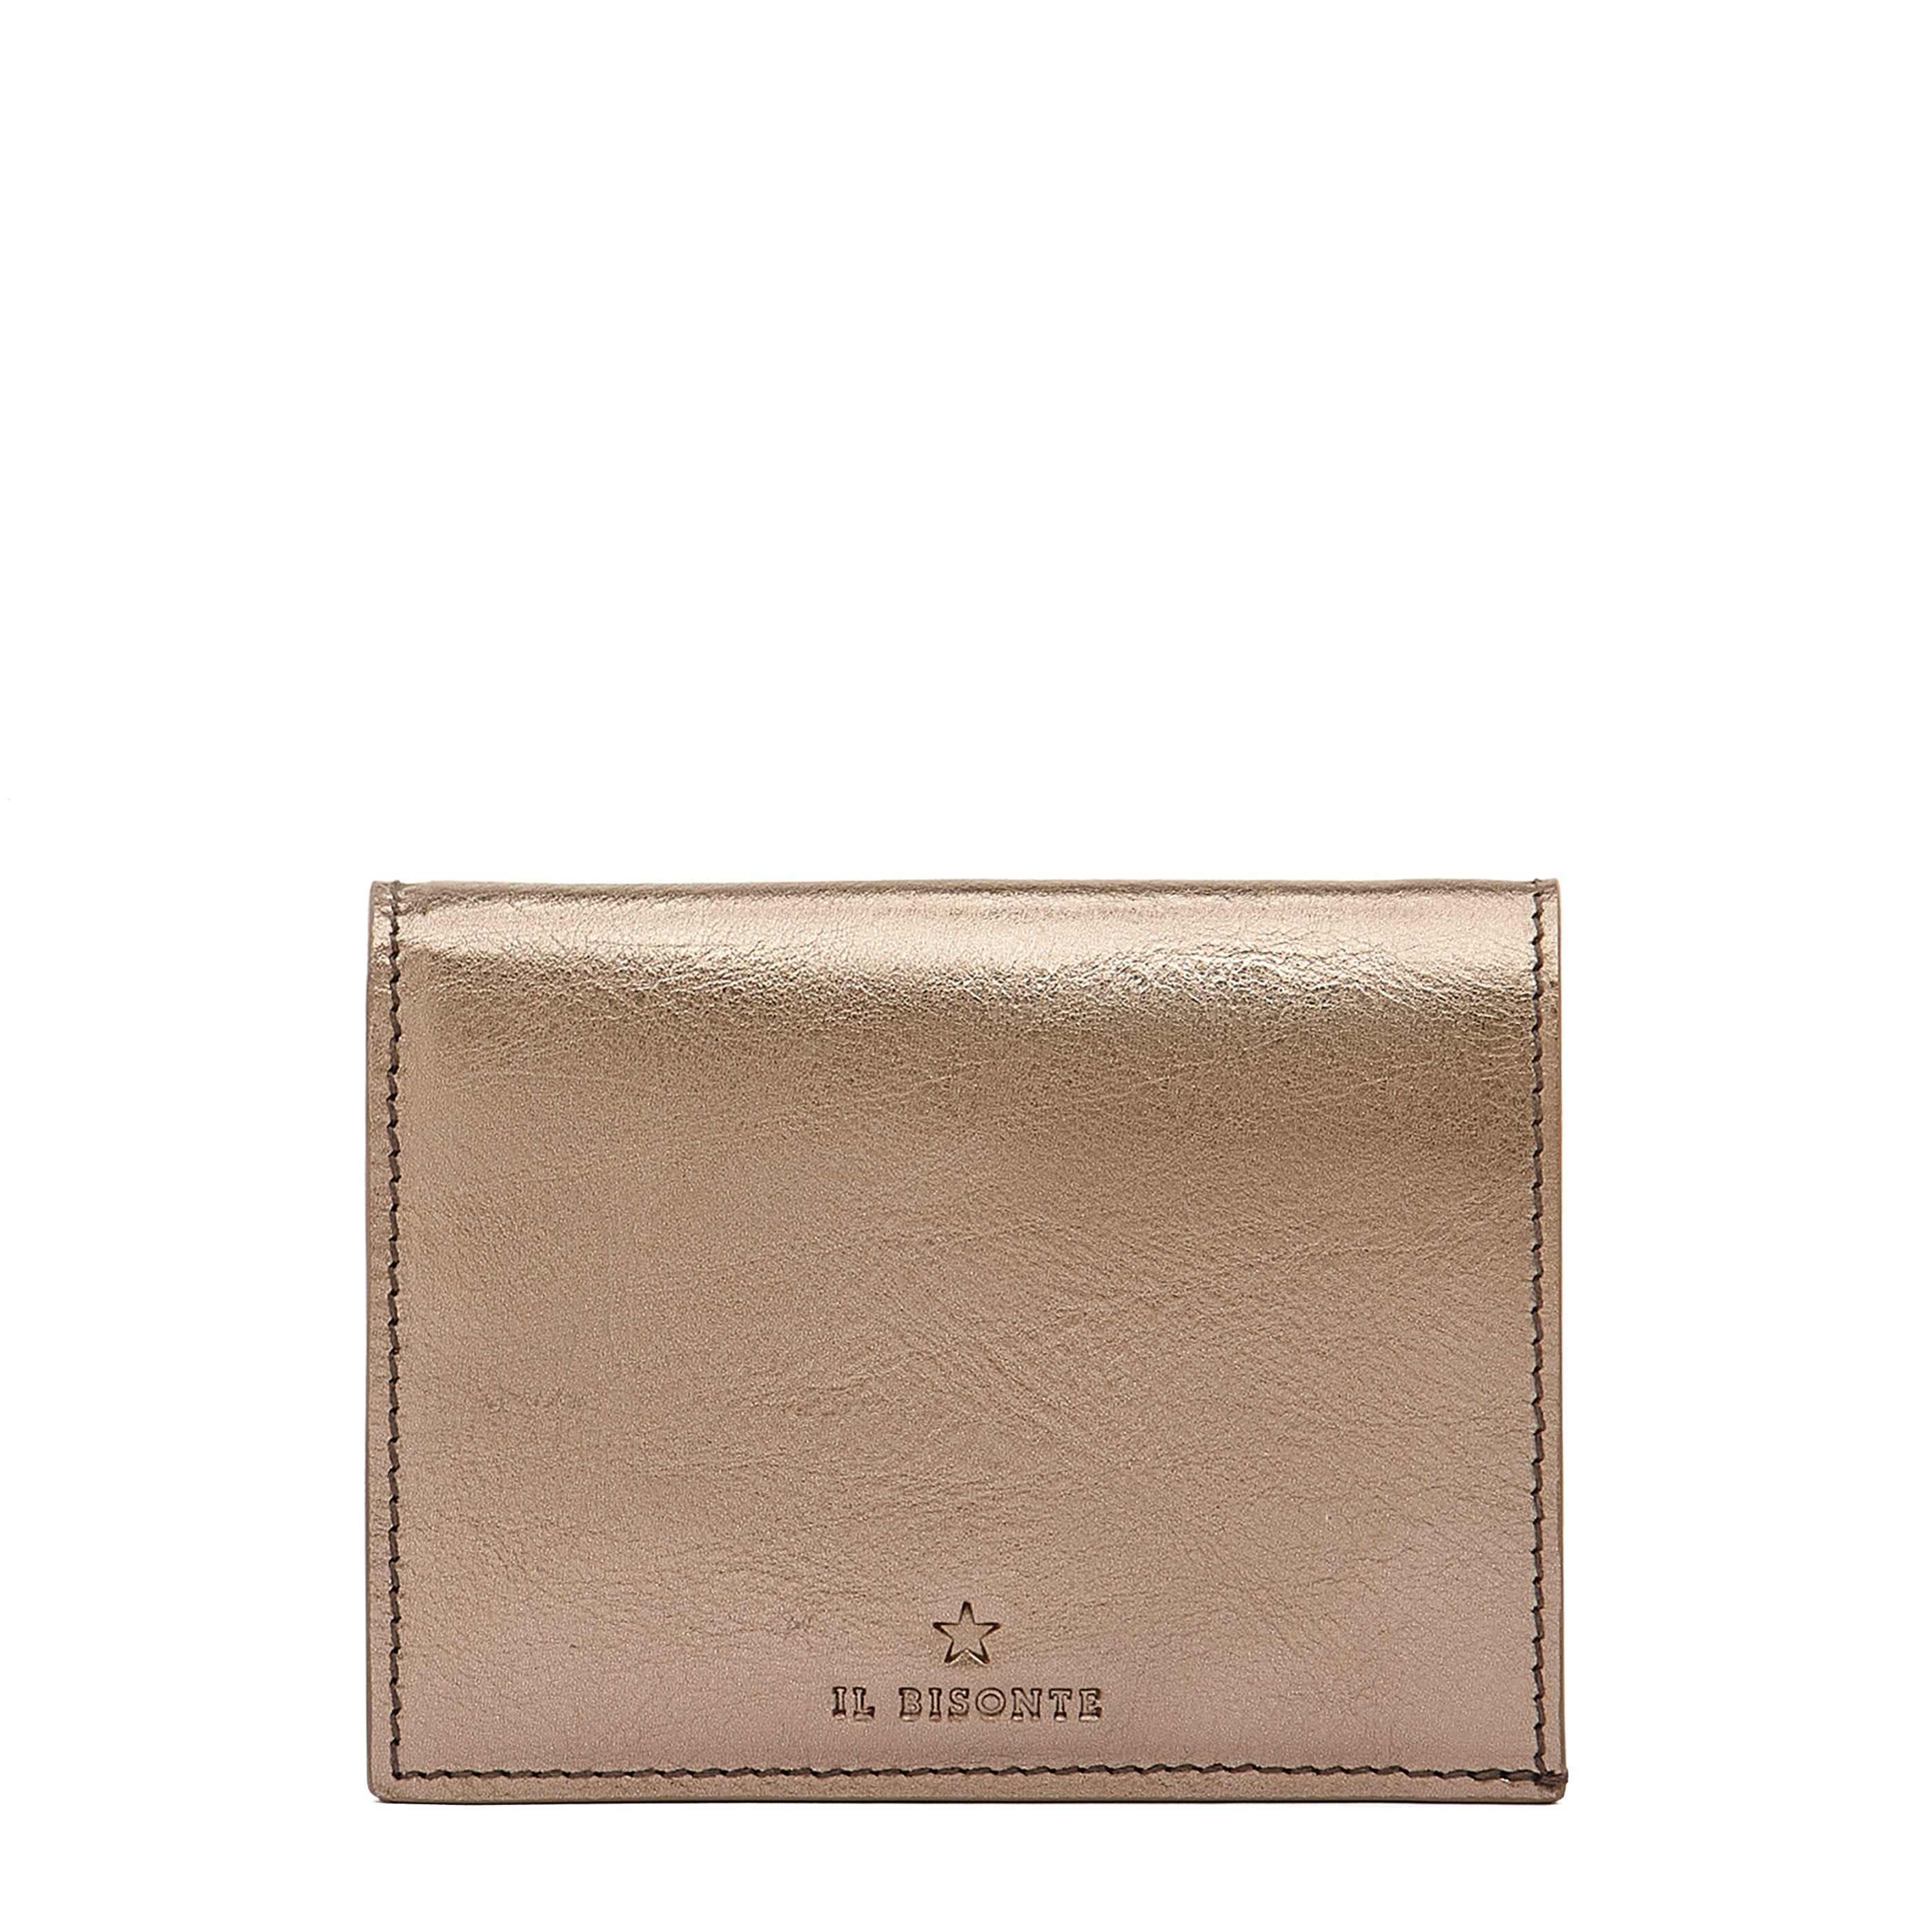 Oliveta  Women's Small Wallet in Leather color Cherry – Il Bisonte